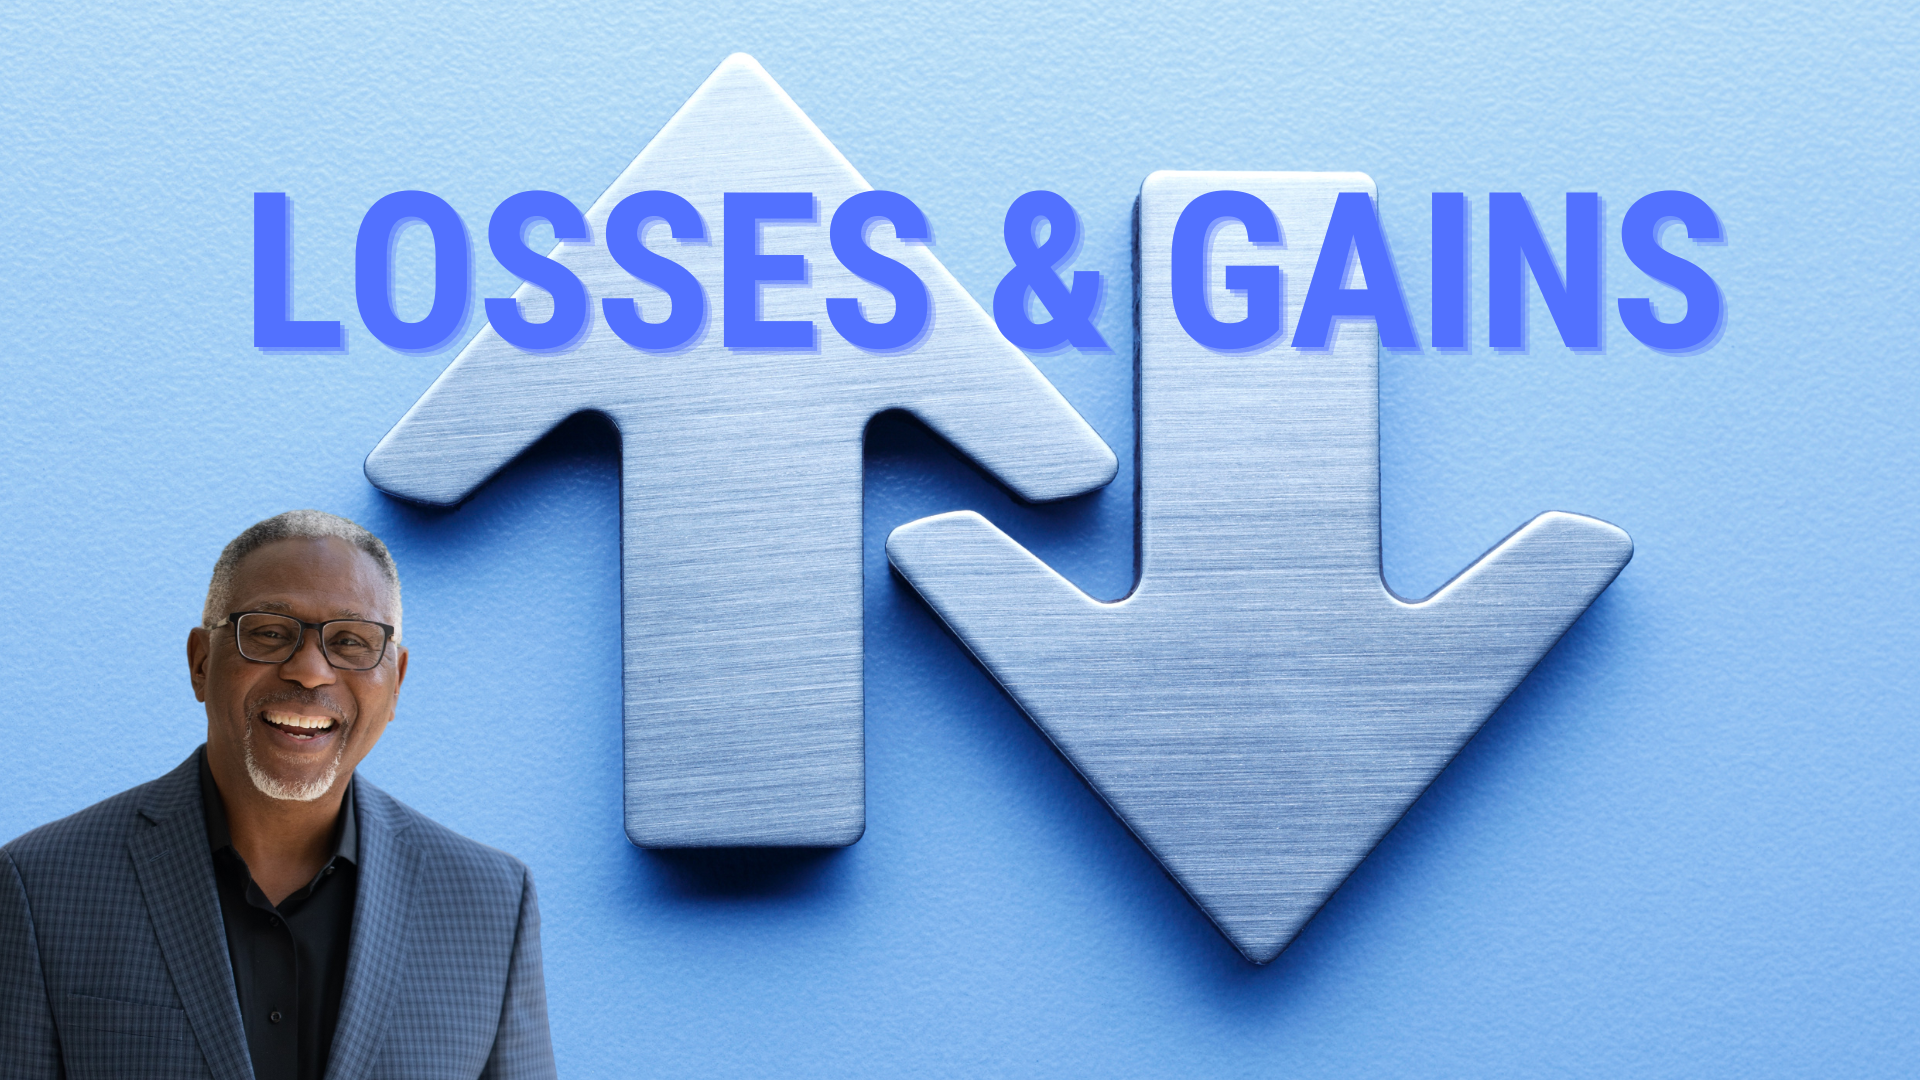 Losses & Gains blog featured image